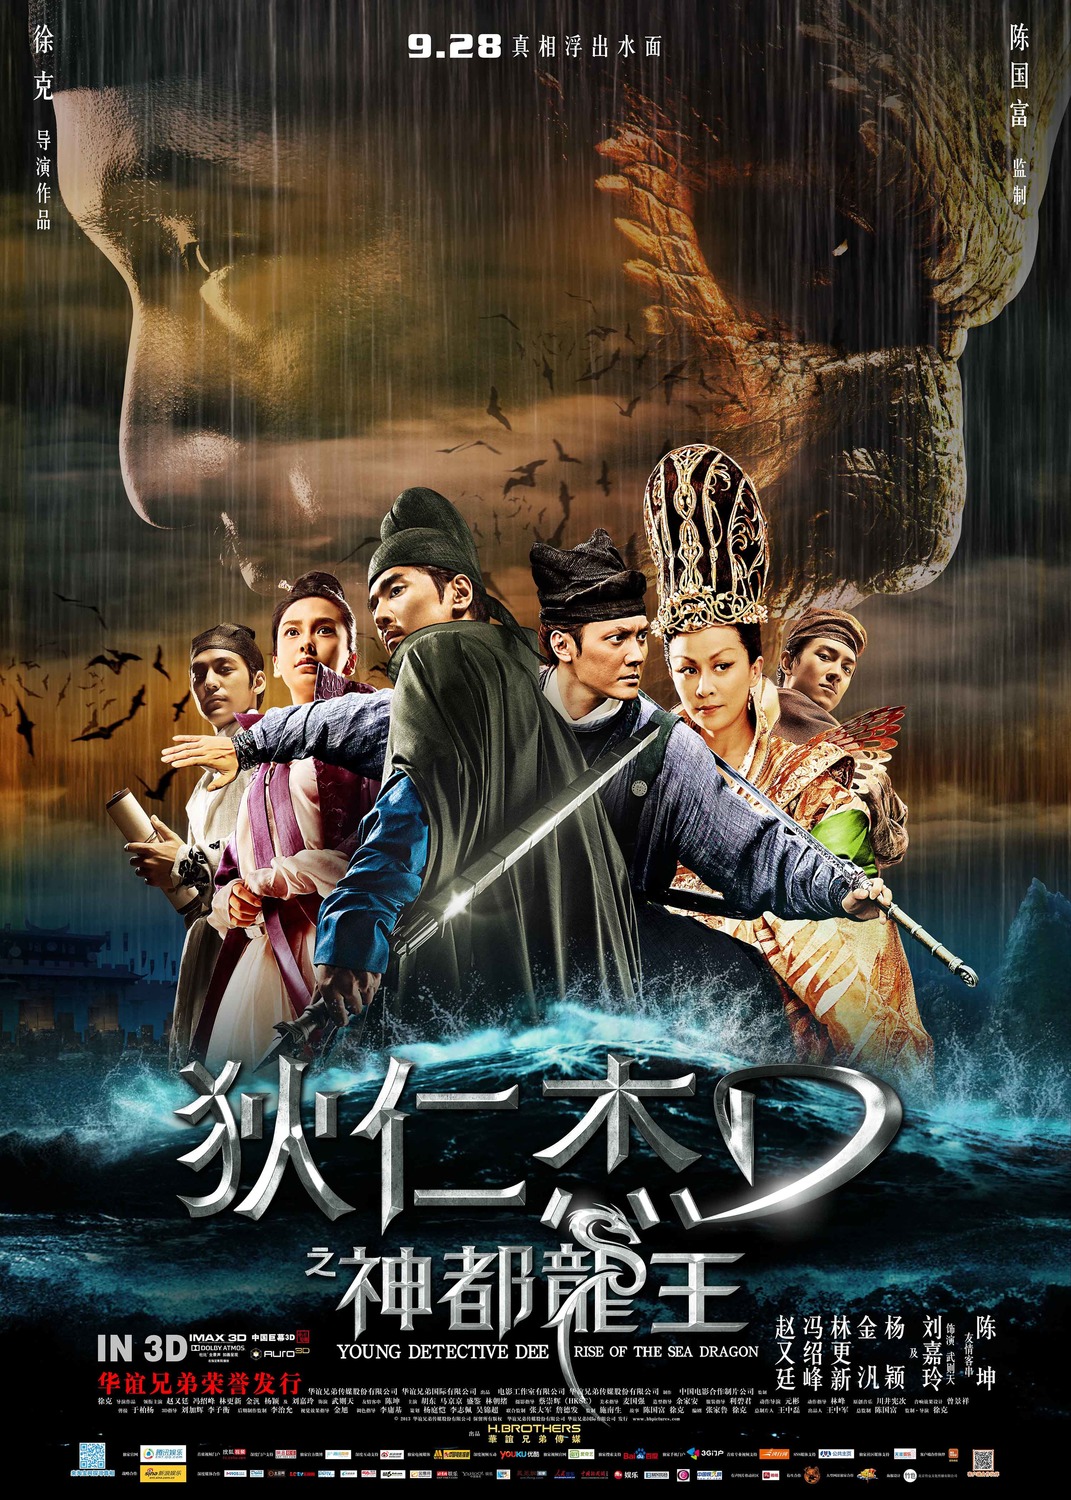 Extra Large Movie Poster Image for Di renjie: Shen du long wang (#1 of 2)